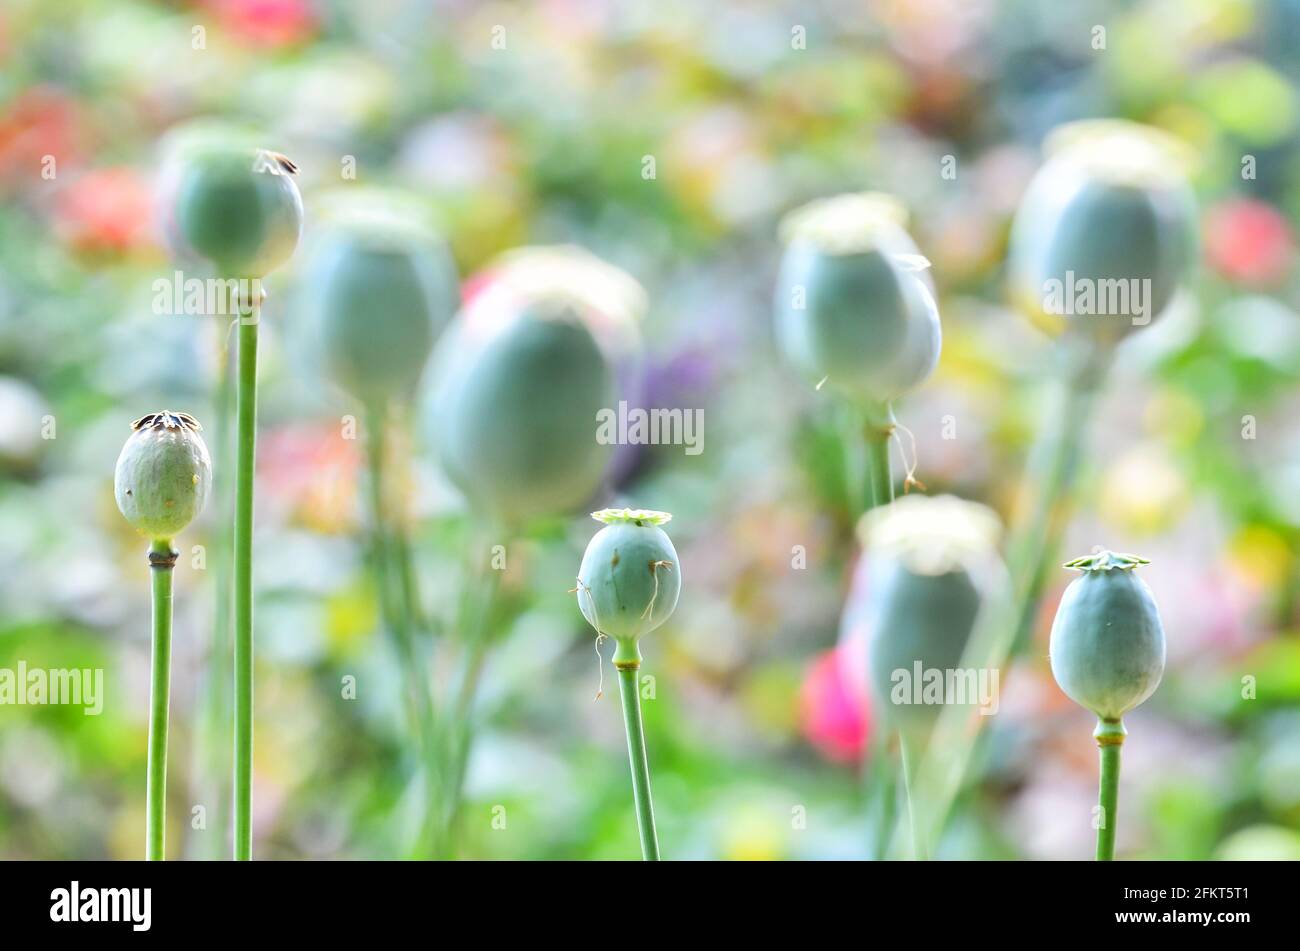 field of poppy seed capsules Stock Photo